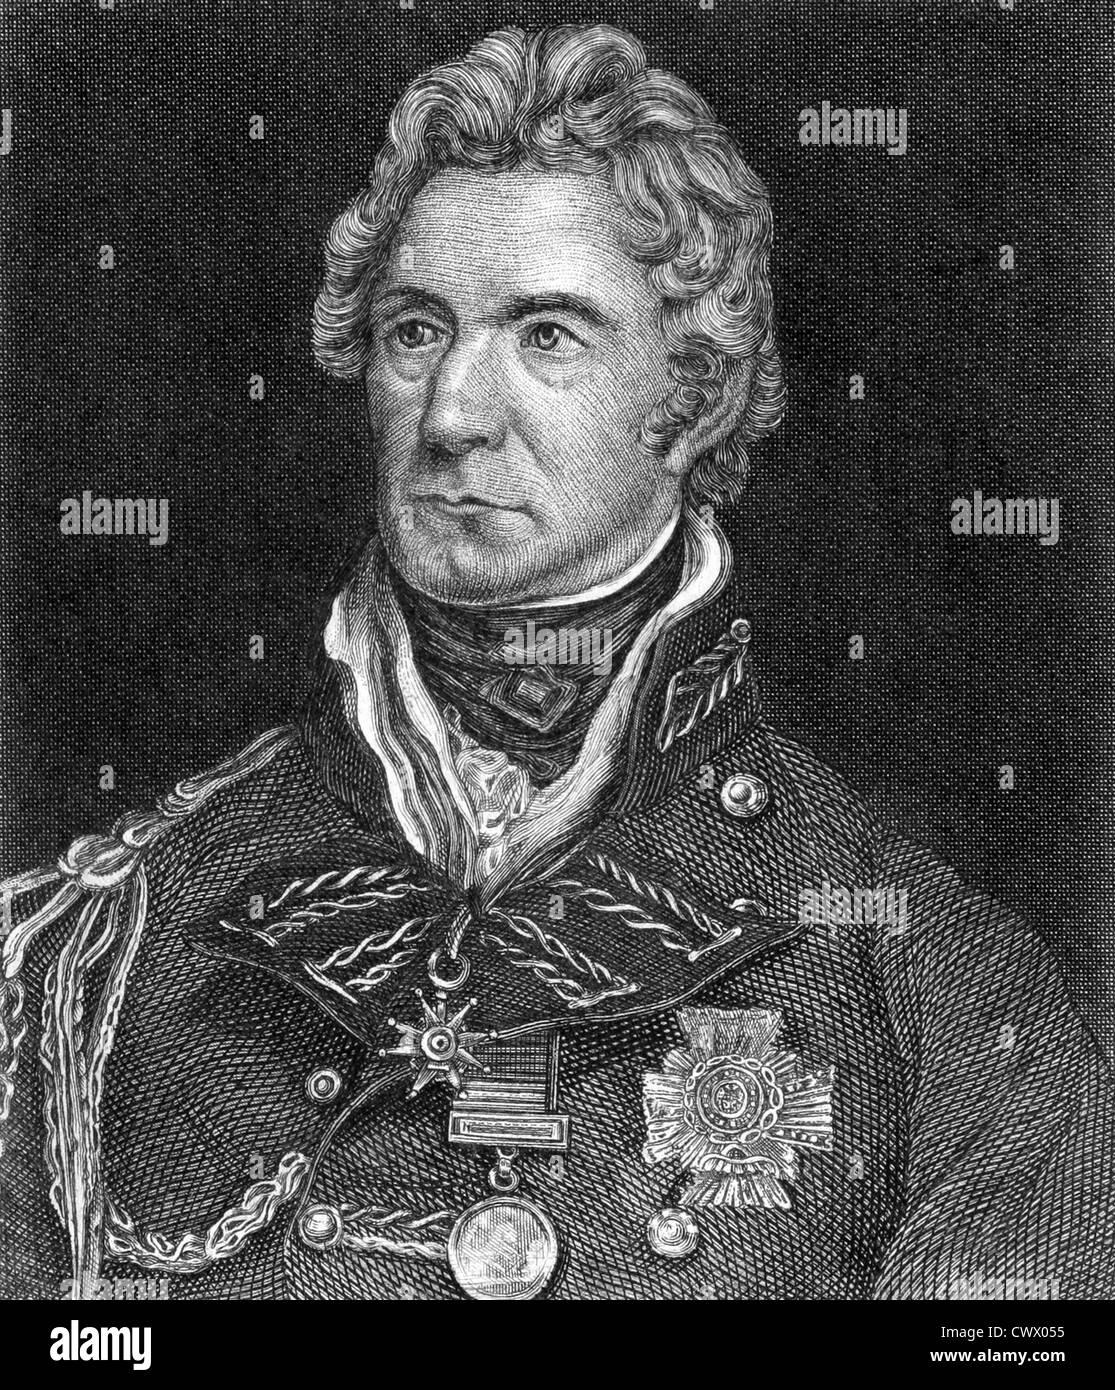 Sir Thomas Munro, 1st Baronet (1761-1827) on engraving from 1859. Scottish soldier and colonial administrator. Stock Photo